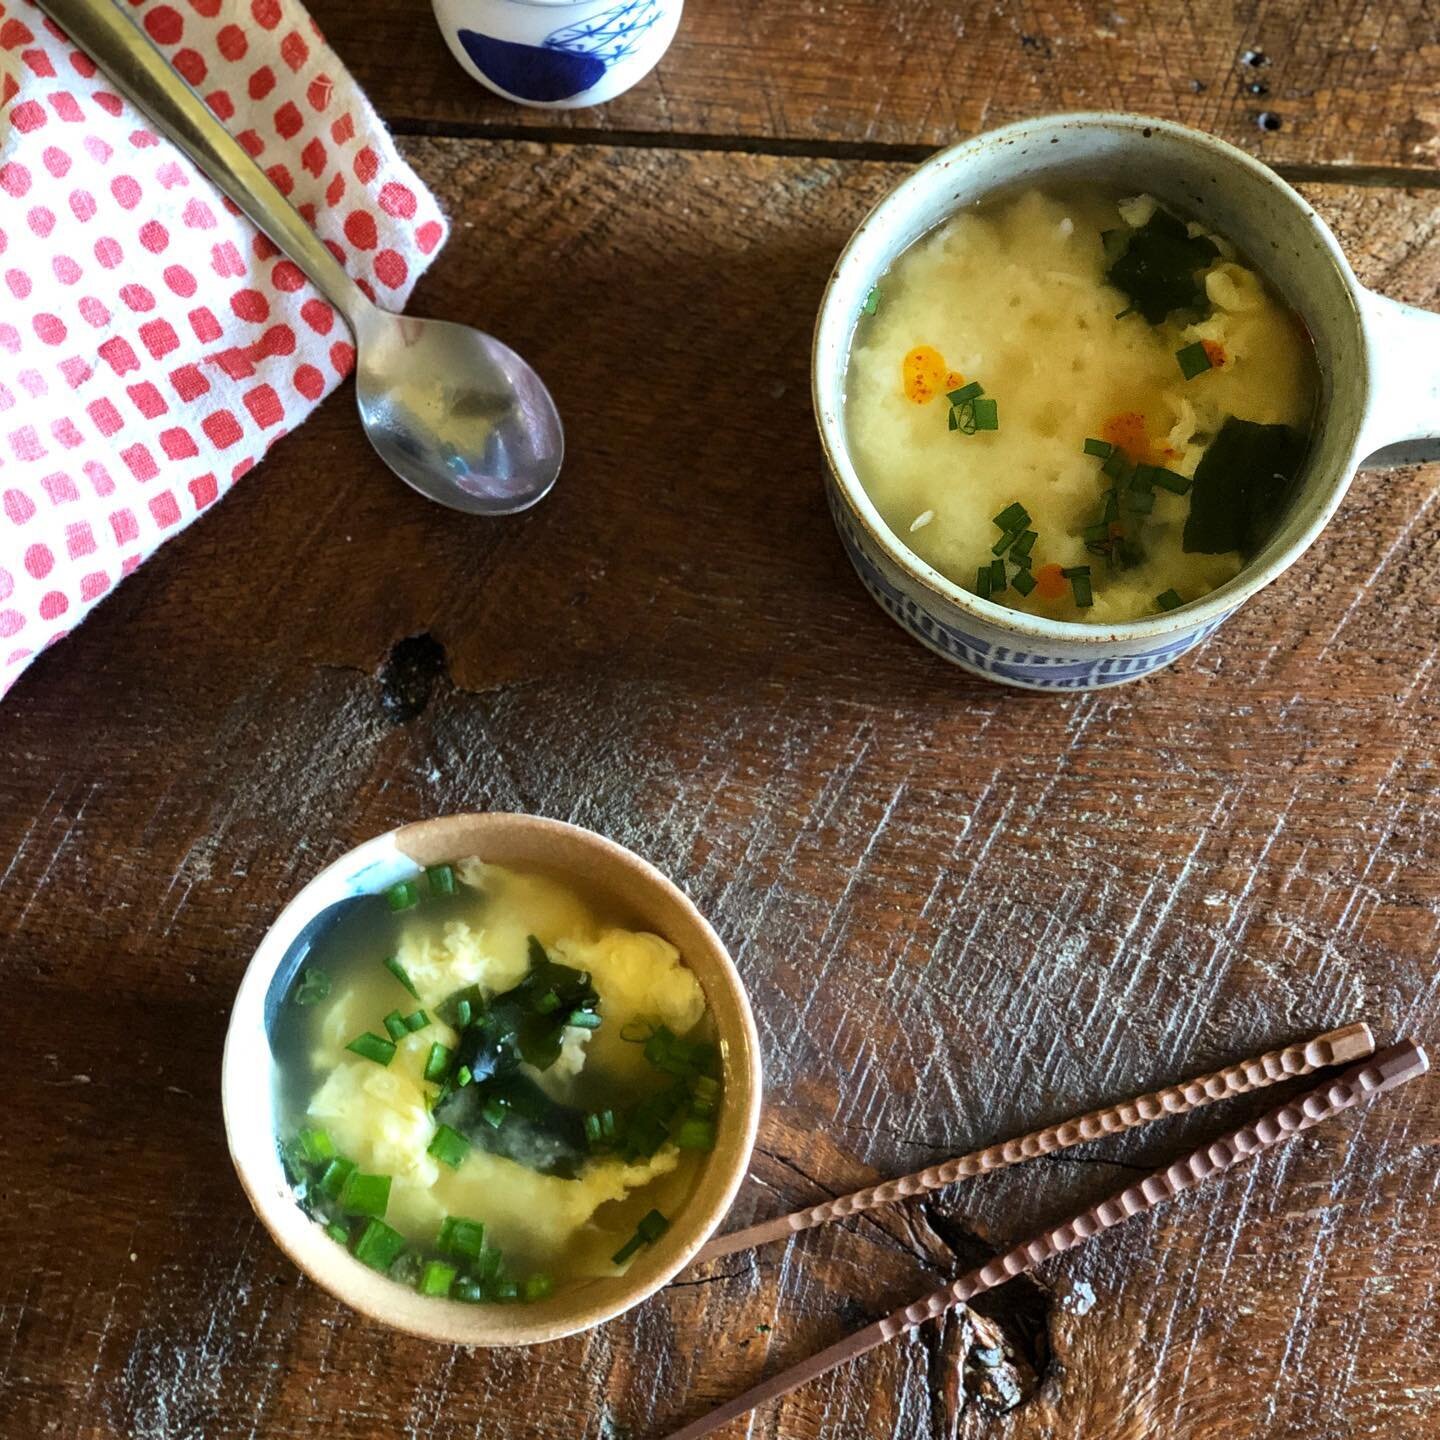 Lazy Sunday Morning Soup🥣 .
Broth, dropped egg , seaweed, spring onion and Rice Miso Soup 😋 .
in Japan, Rice and Miso soup in one bowl called &ldquo;NEKOMANMA&rdquo; which means Cat/dog meal. 😂 
Yes... in my childhood my mom used to give a dog lef